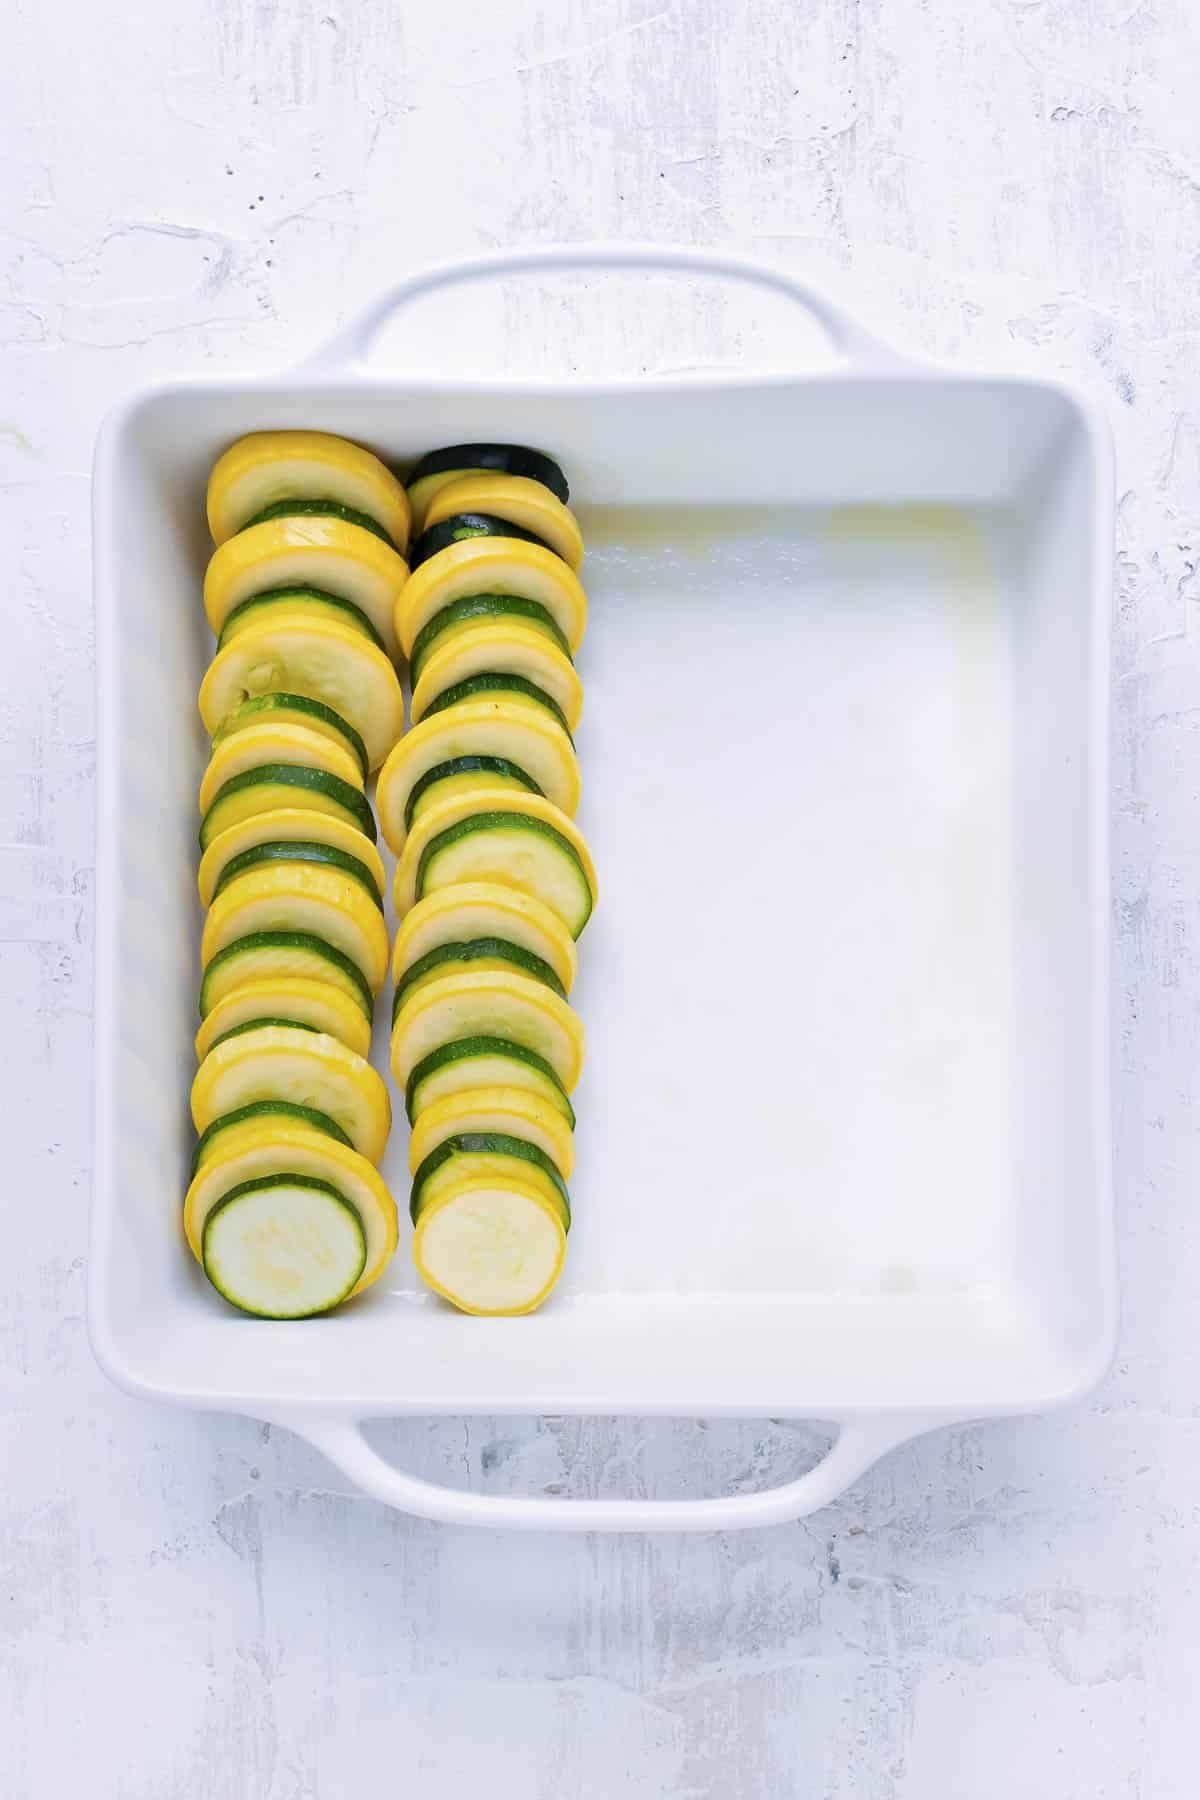 Yellow squash and zucchini are layered into a baking dish.